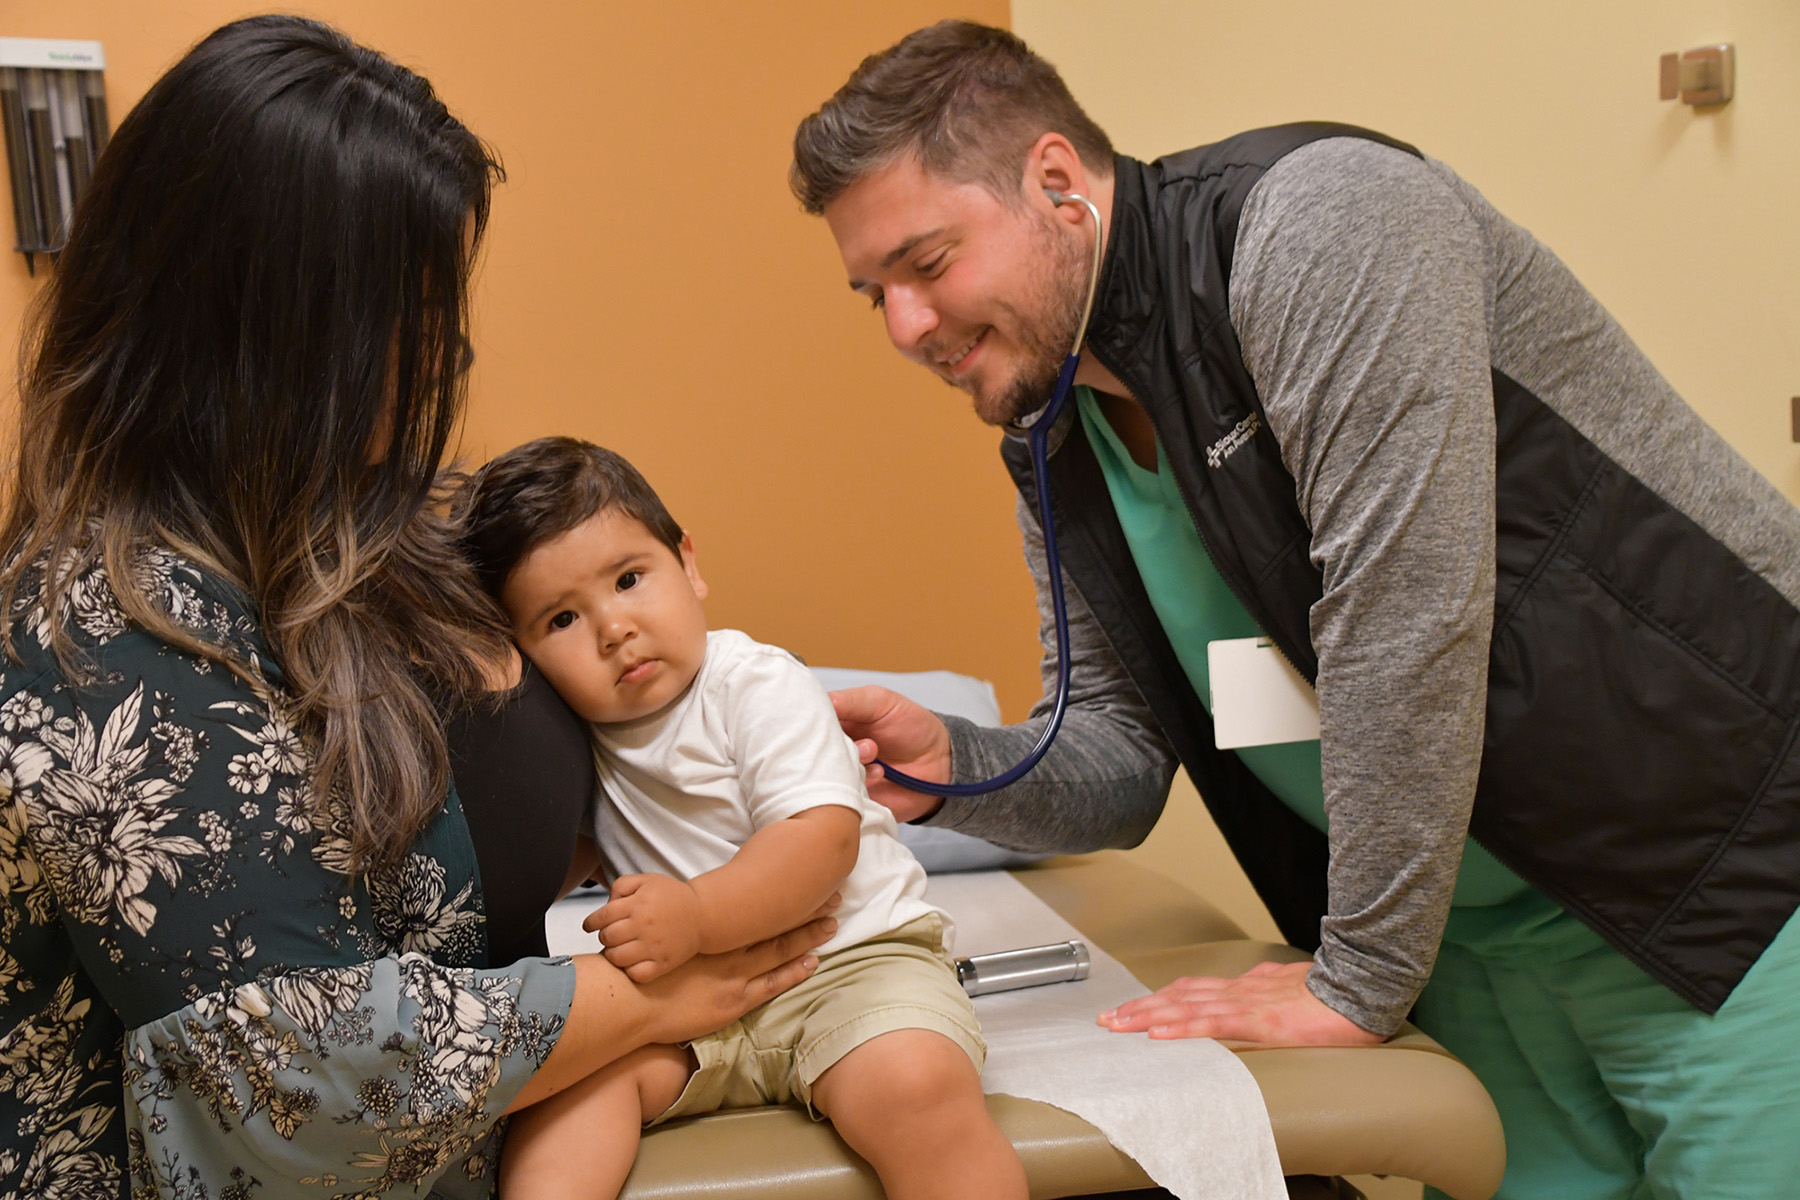 University of Iowa Carver College of Medicine graduate David Janssen sees a pediatric patient and the child's mother at his clinic